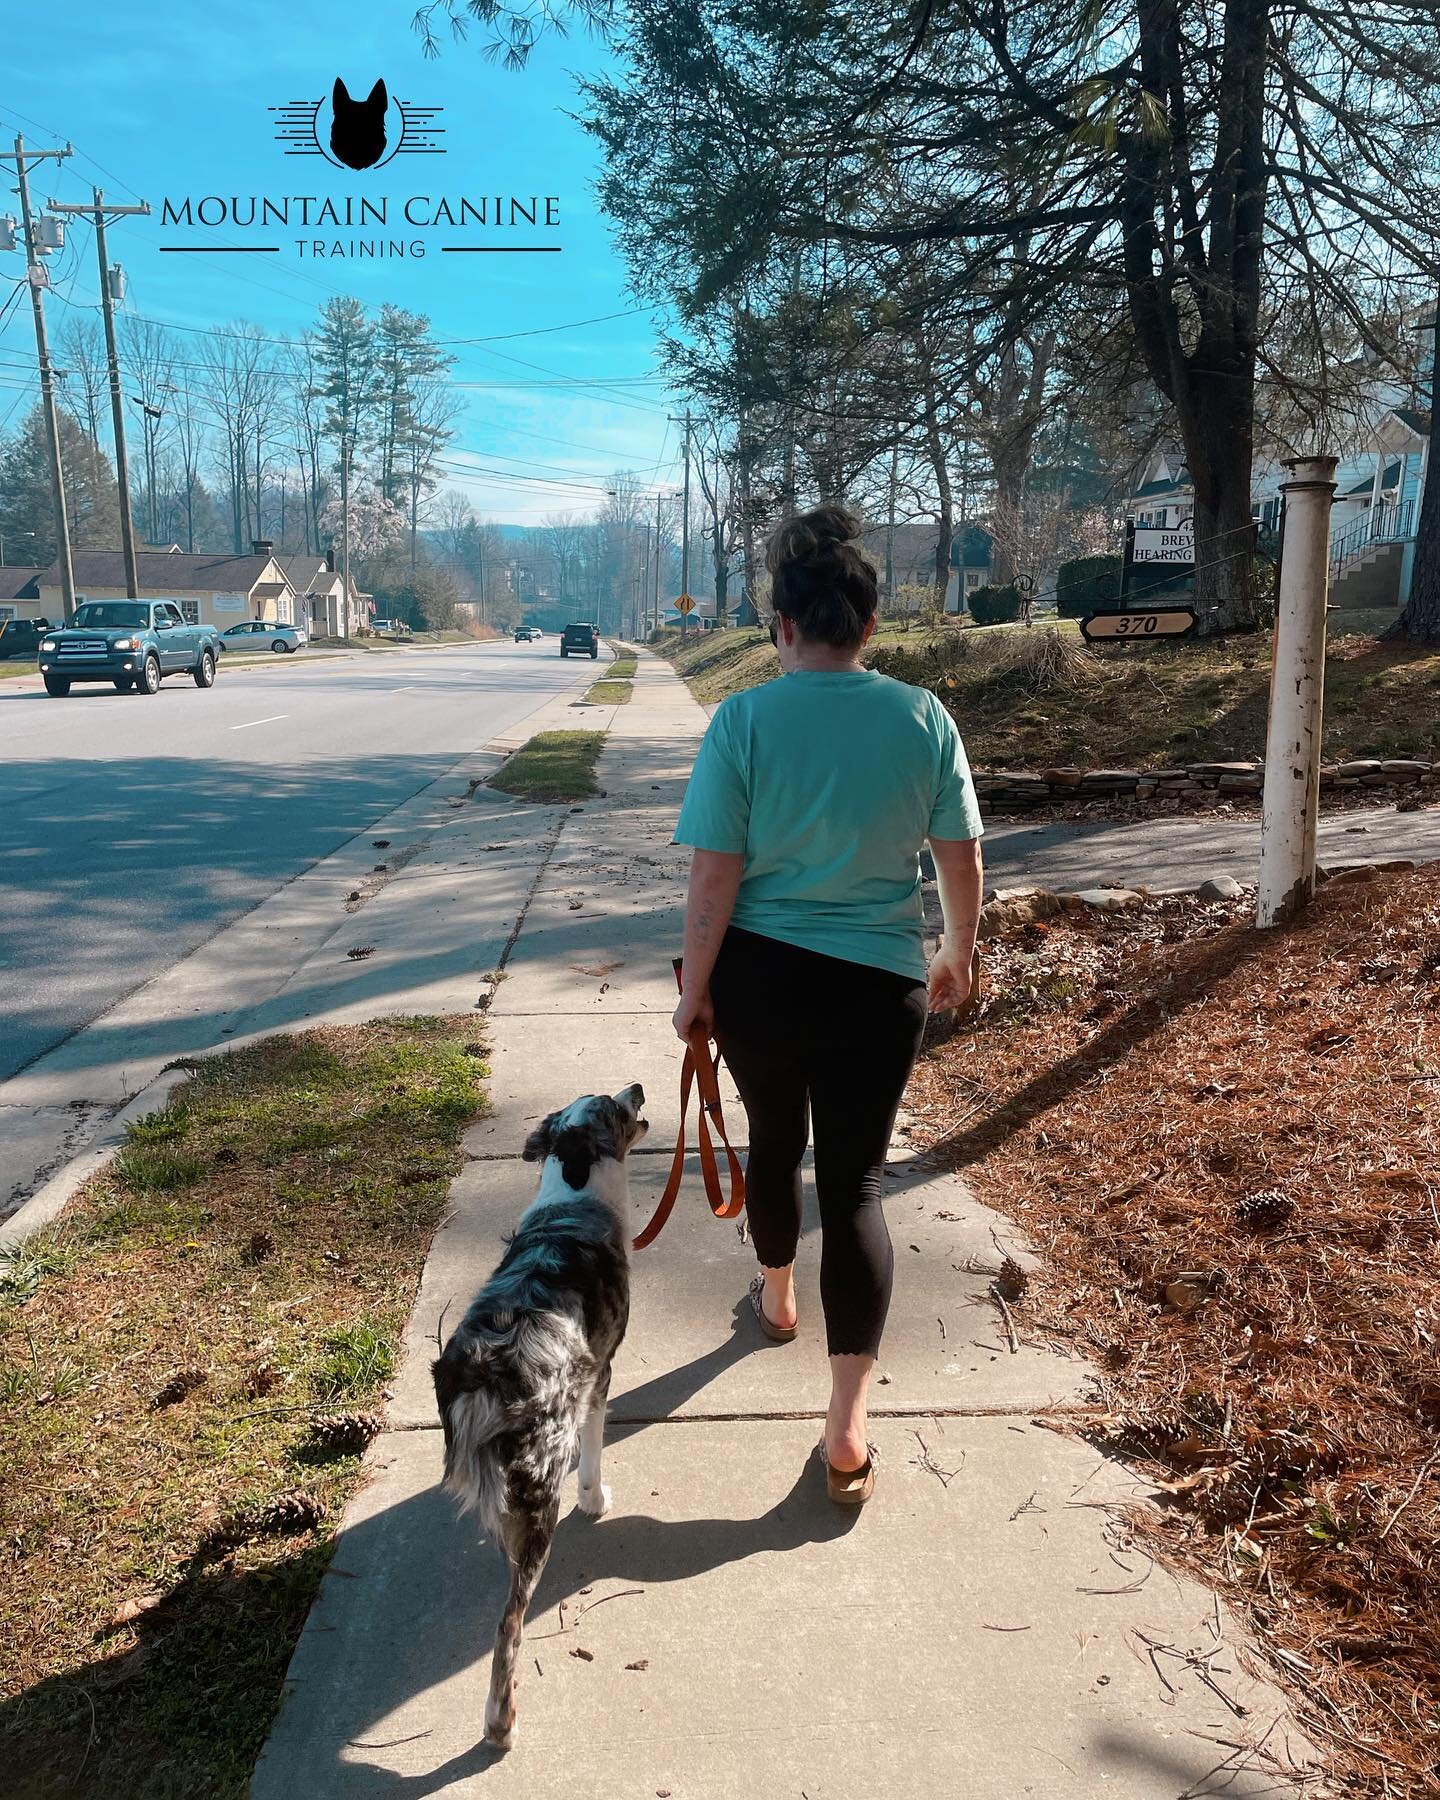 &ldquo;Walk Your Dog.

Even if you have a backyard, let them see the rest of the world.

Even if they are 10lbs, let them sniff the grass.

Even if they are older, let them walk a little slower.

Whether you live in the country, suburbs, or city, wal